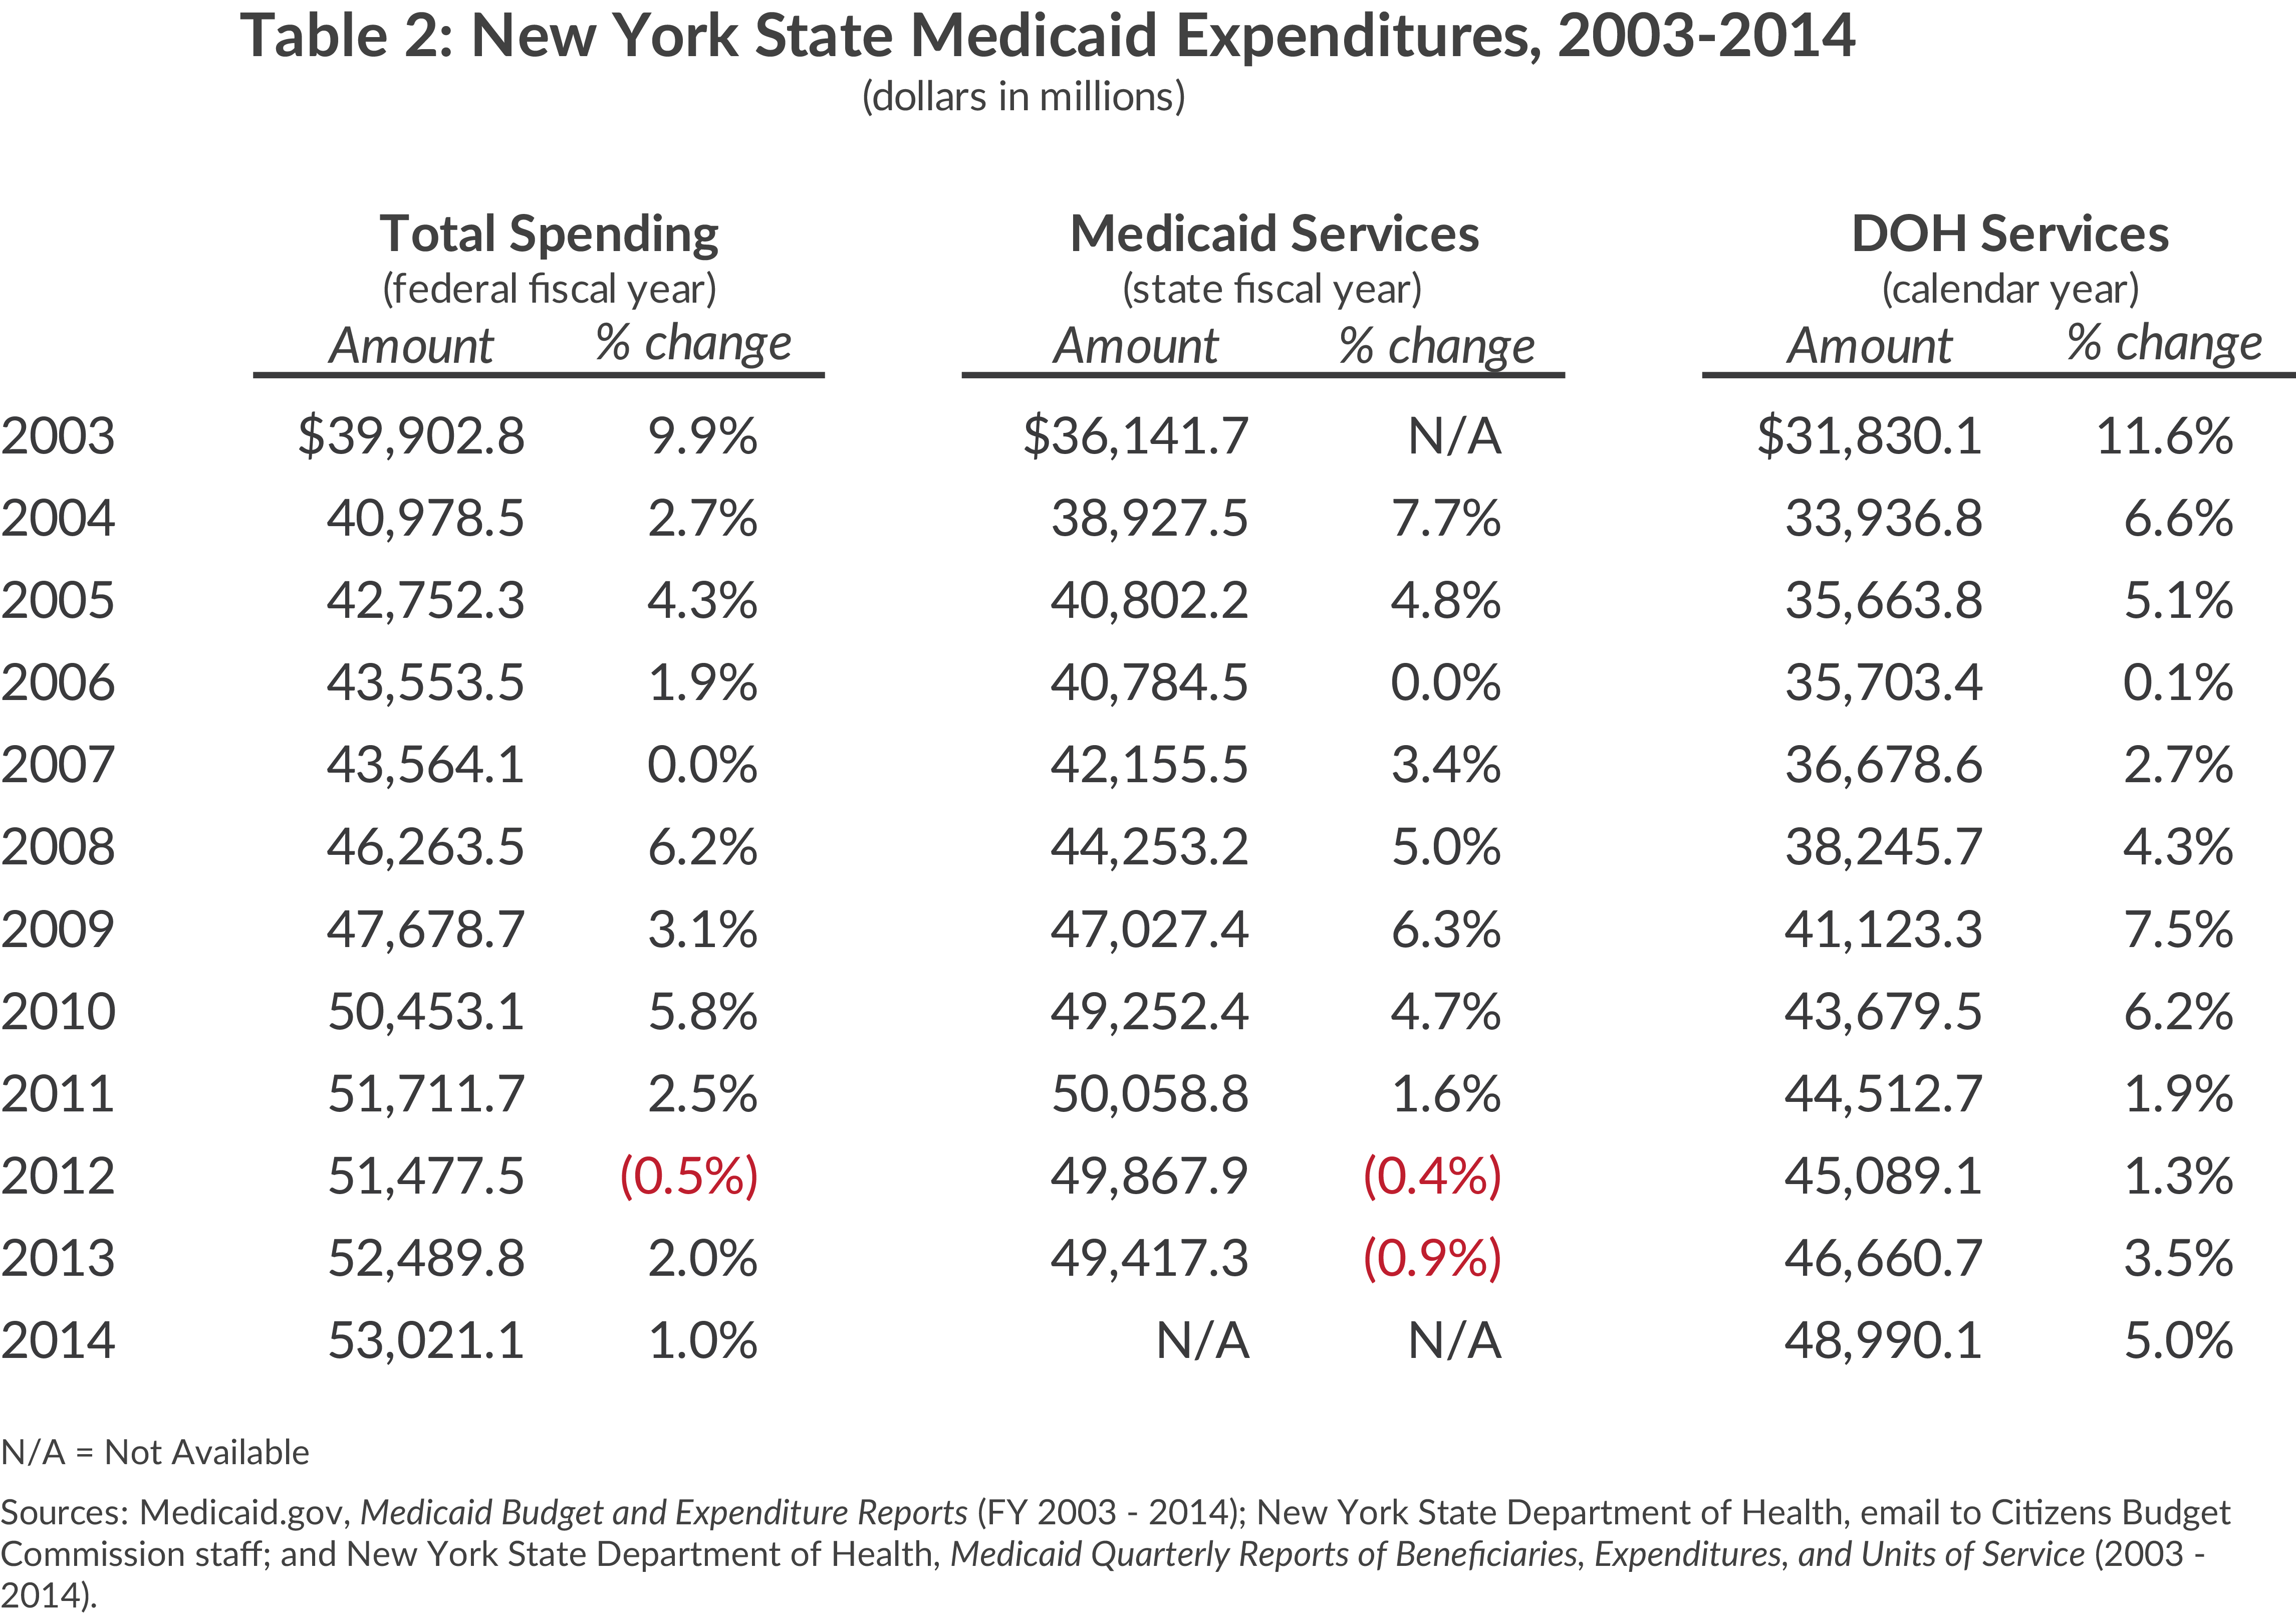 New York State Medicaid Expenditures, 2003-2014